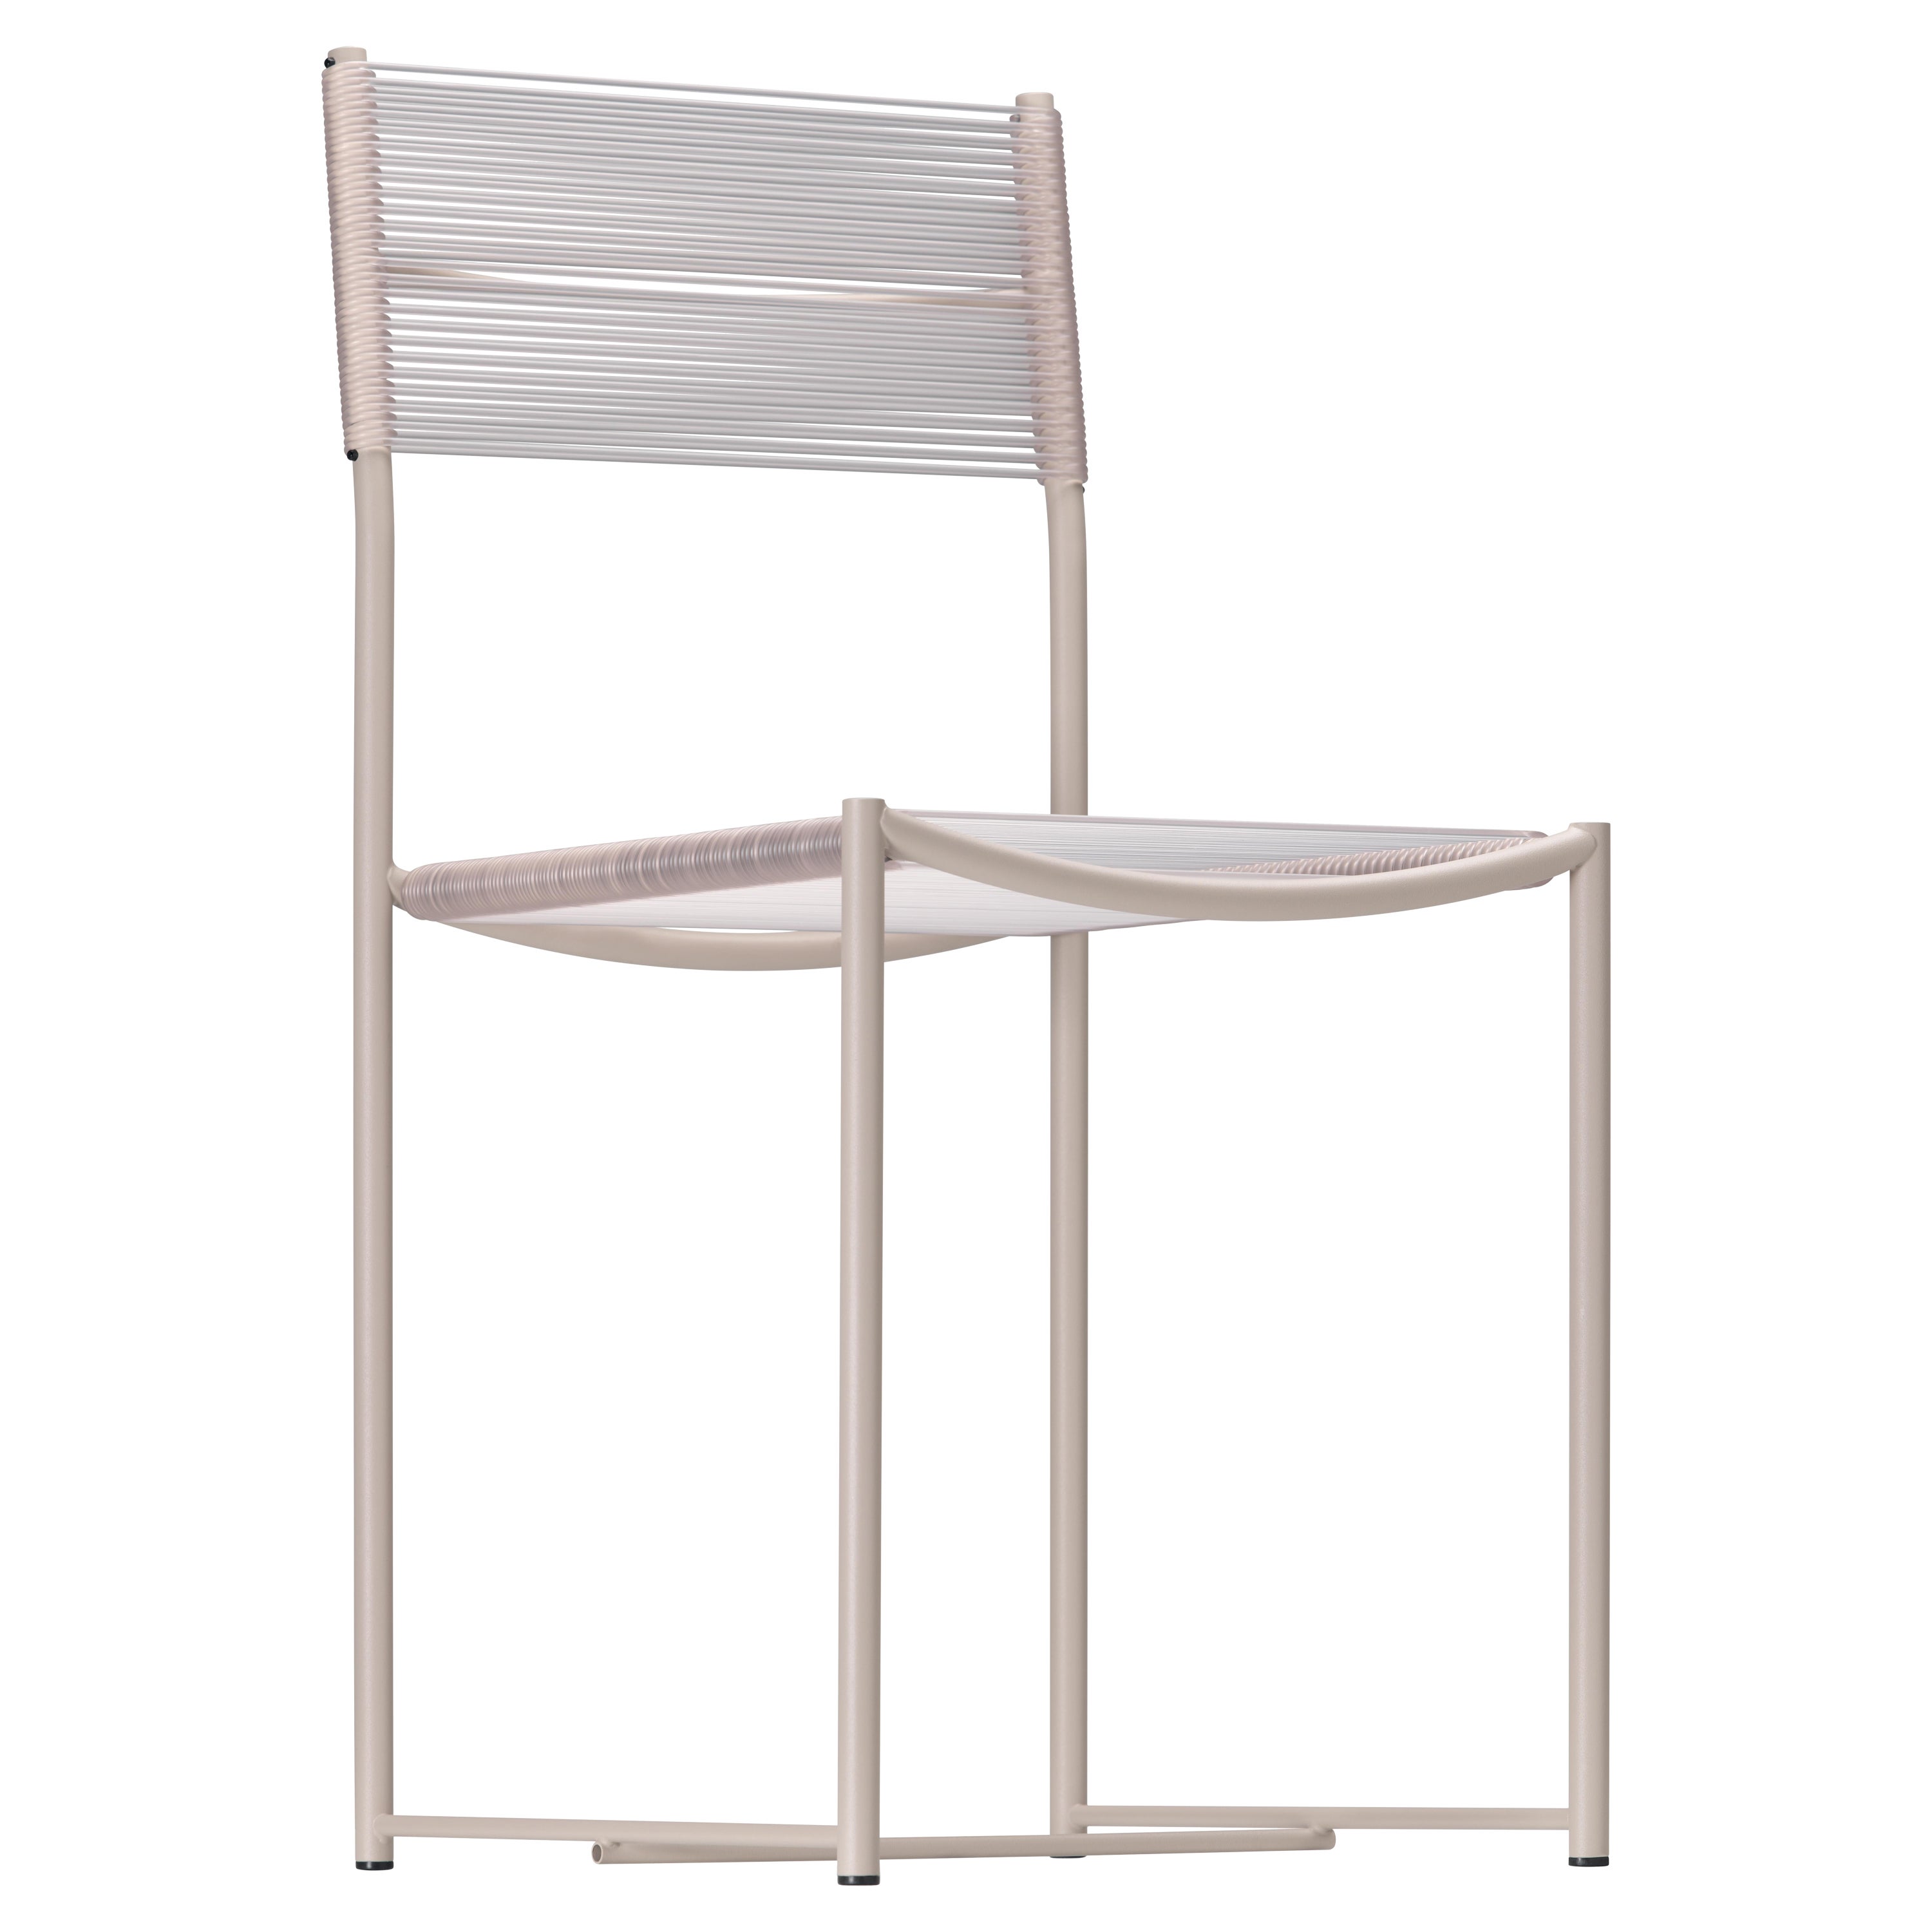 Alias 101 Spaghetti Chair with Clear PVC Seat and Sand Lacquered Steel Frame For Sale